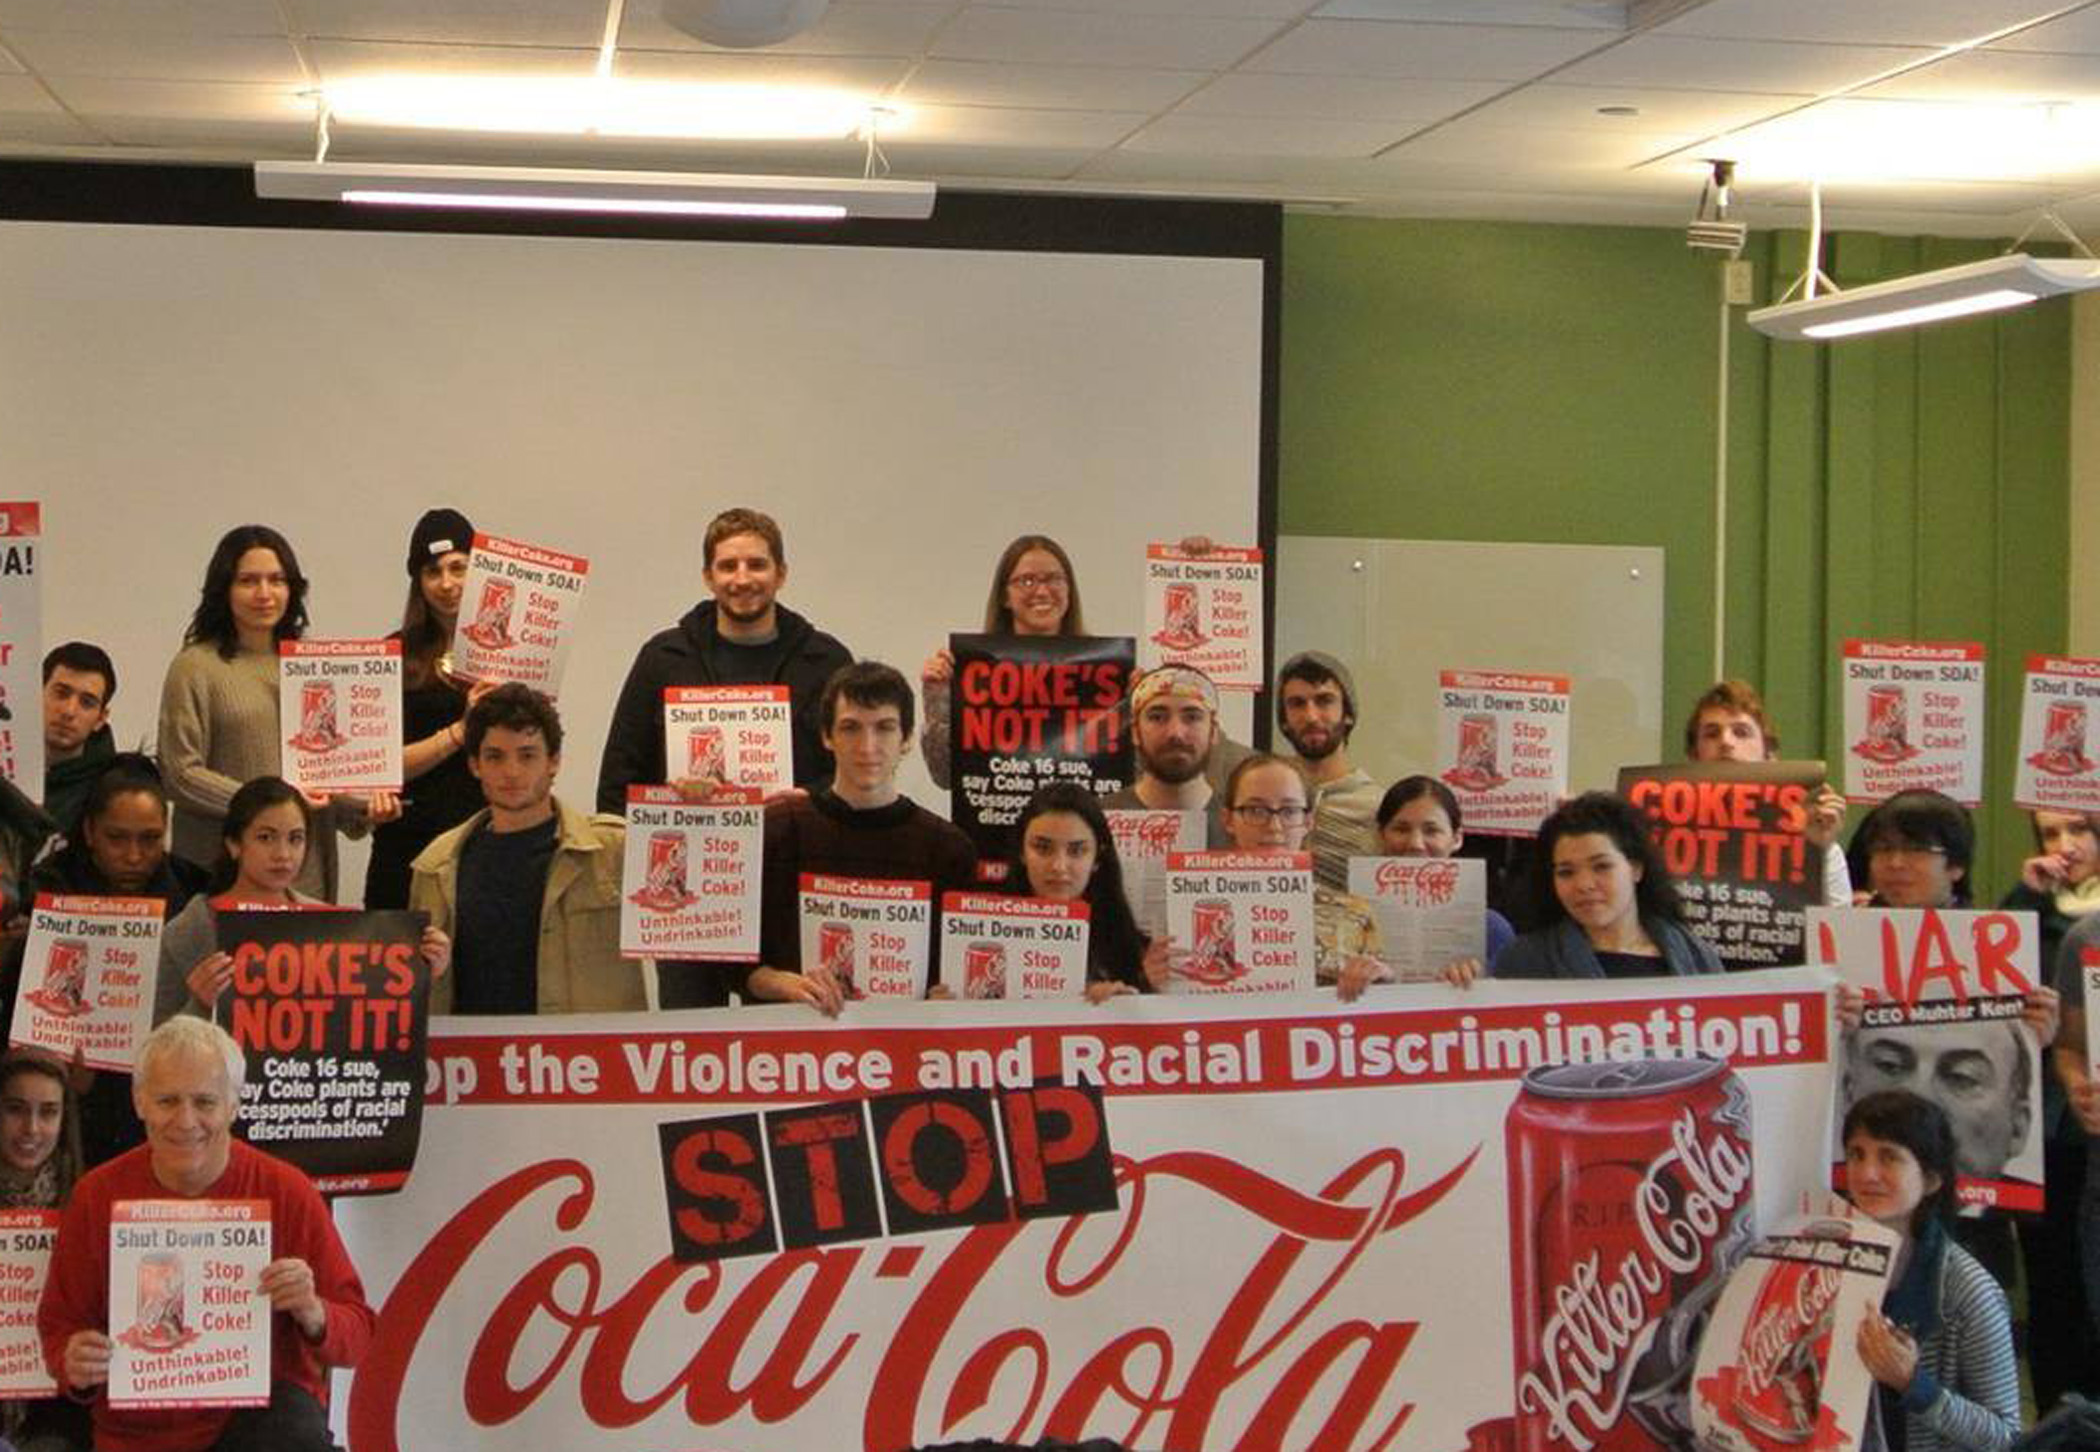 Binghampton University, SUNY with Ray Rogers and the Campaign to Stop Killer Coke